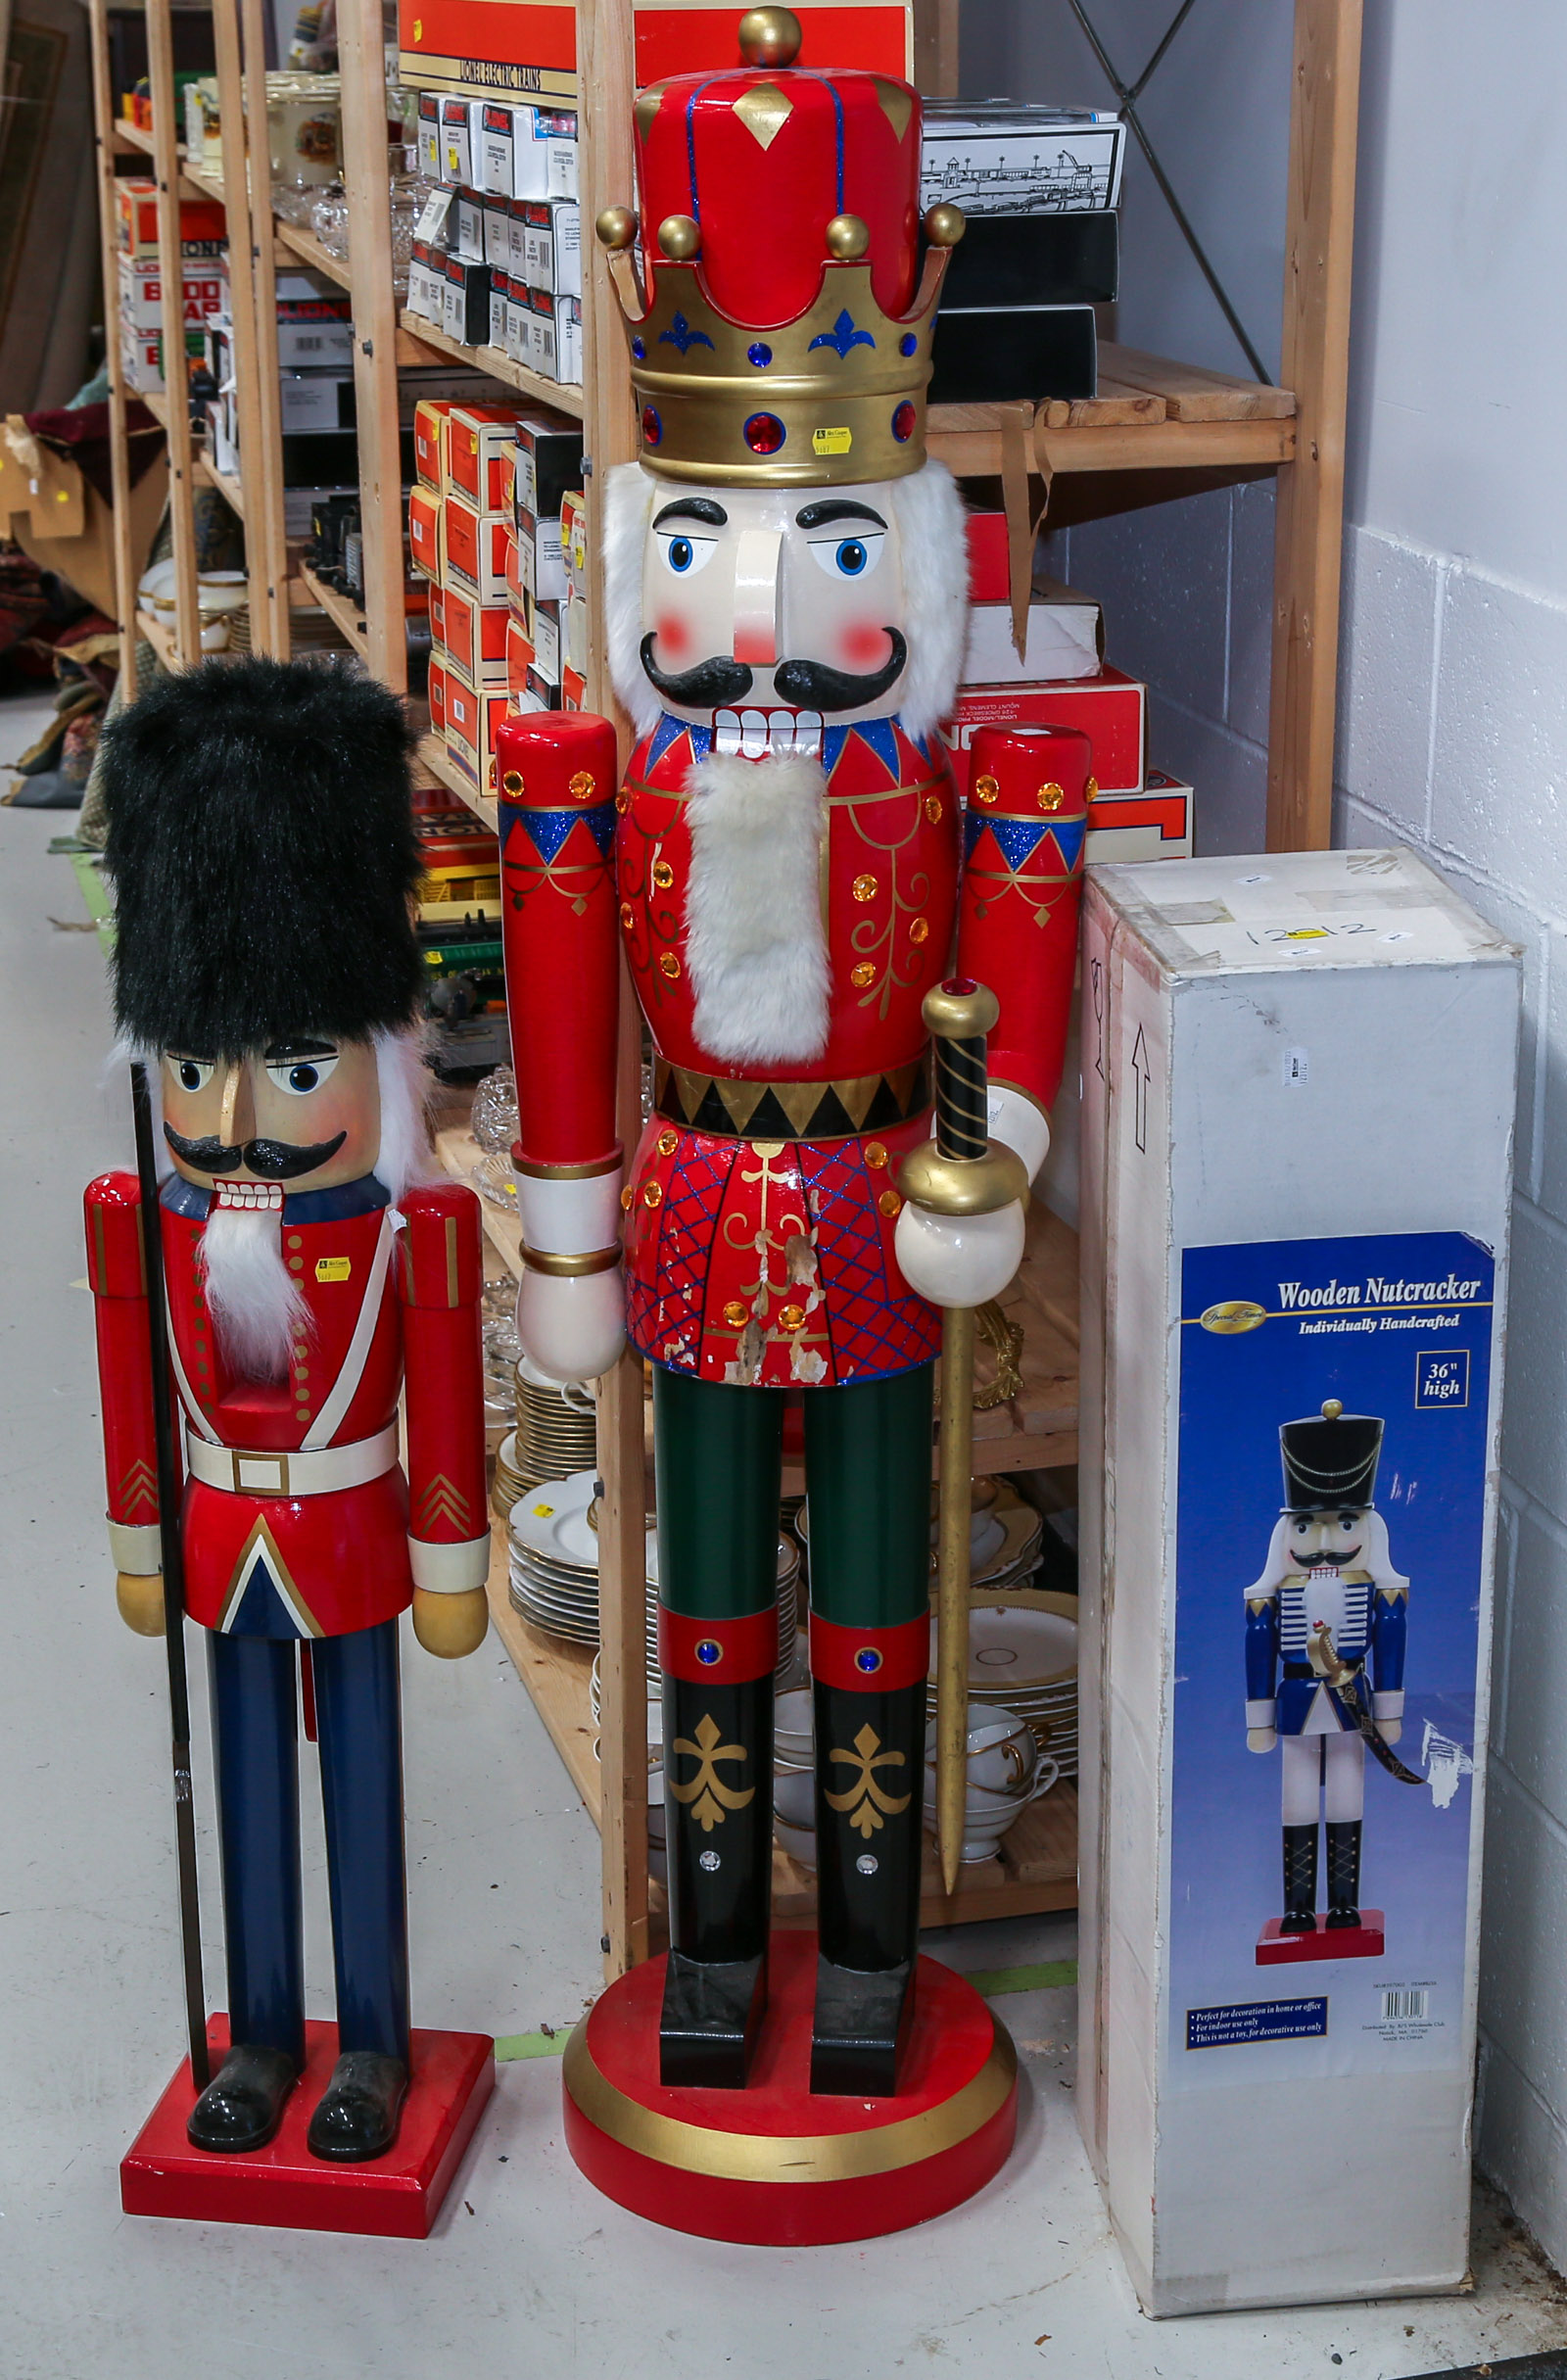 THREE LARGE WOODEN NUTCRACKERS